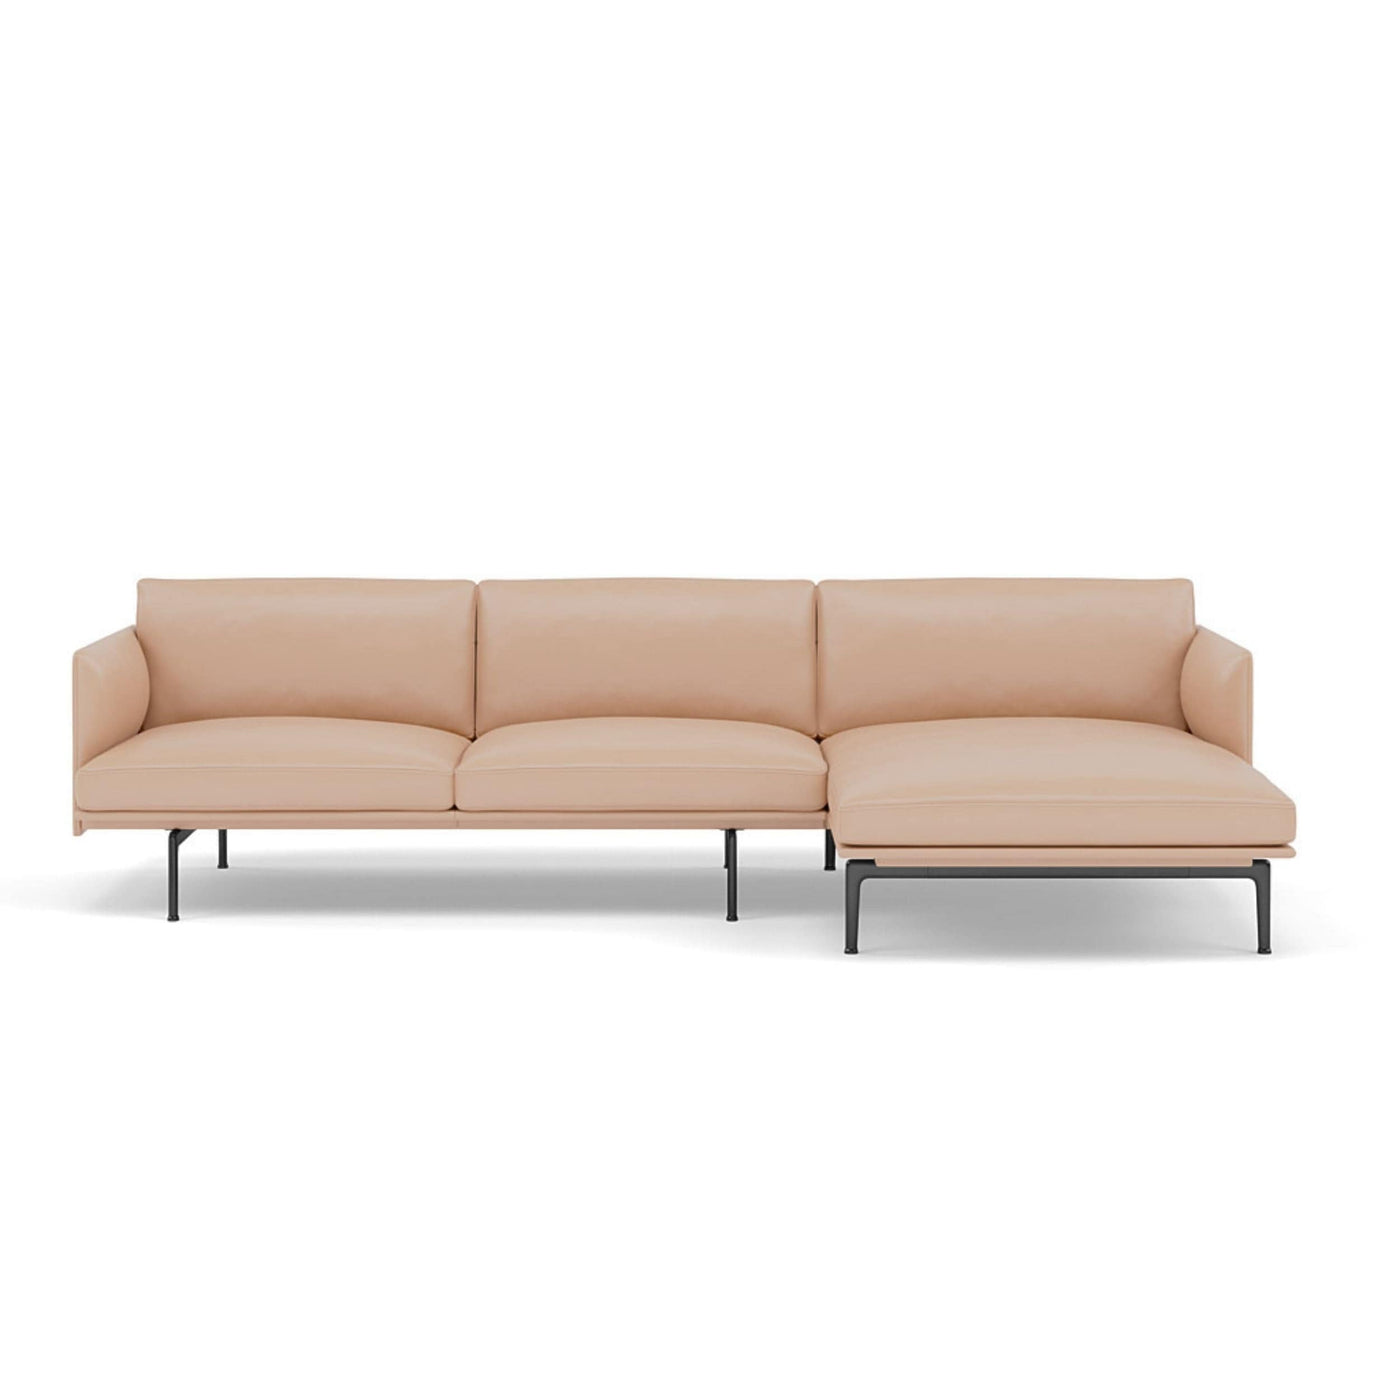 Muuto Outline Chaise Longue sofa in beige refine leather. Made to order from someday designs. #colour_beige-refine-leather